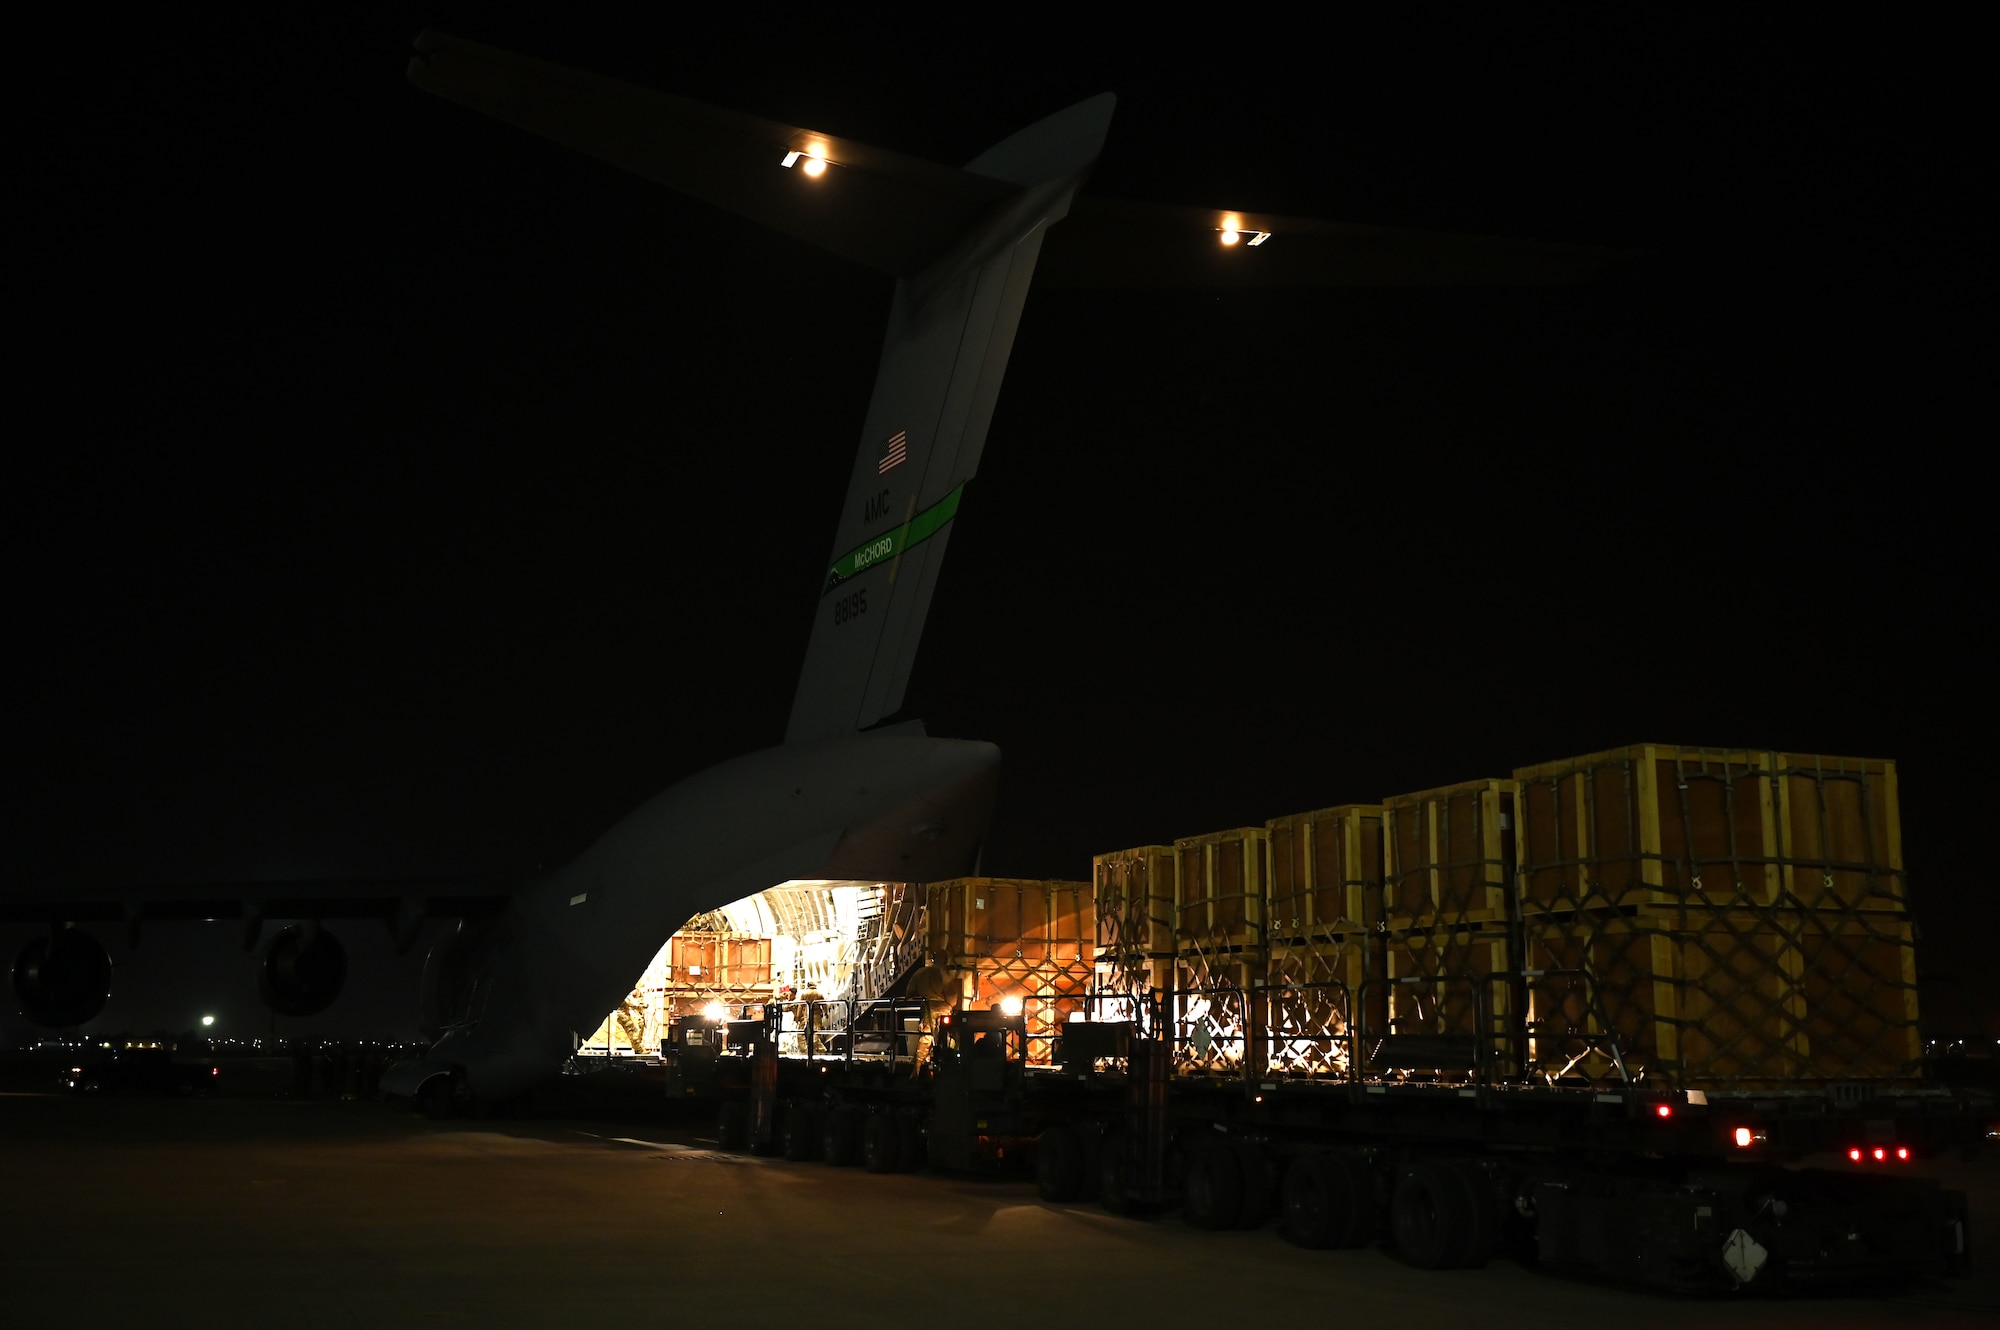 U.S. Air Force Airmen unload humanitarian aid supplies from a C-17 Globemaster III assigned to the 8th Expeditionary Airlift Squadron, to provide international aid to Türkiye at Incirlik Air Base, Türkiye, Feb. 21, 2023. The 8th EAS personnel airlifted more than 300,000 pounds of aid, providing humanitarian assistance in response to the devastating impacts in Türkiye following the worst earthquake to hit the region in almost a century. (U.S. Air Force photo by Staff Sgt. Gerald R. Willis)